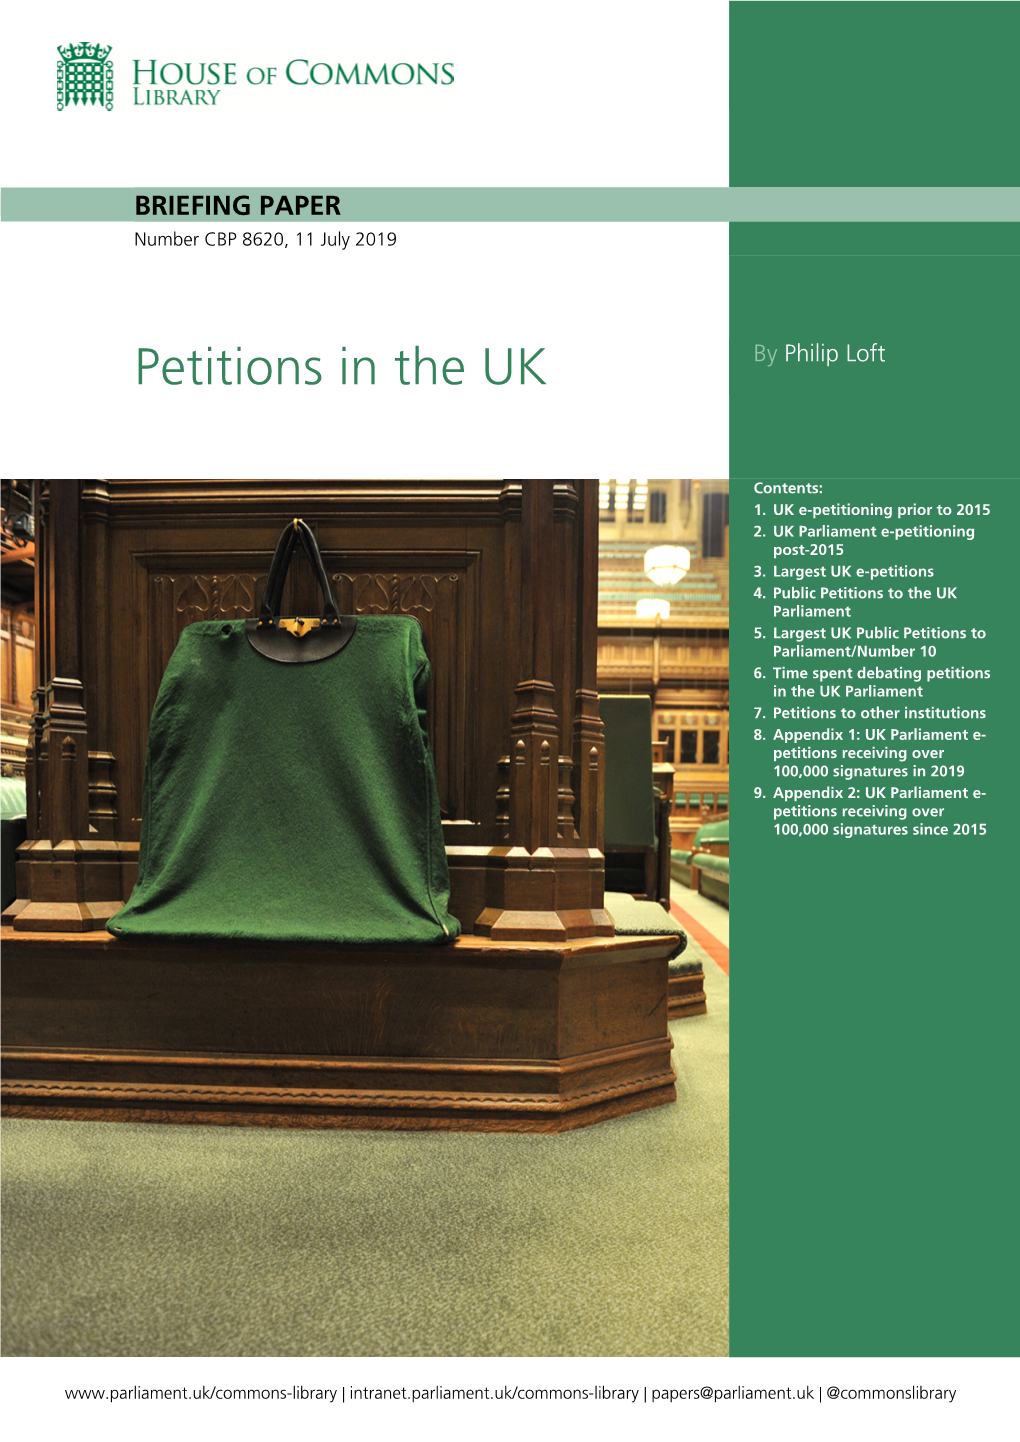 Petitions in the UK